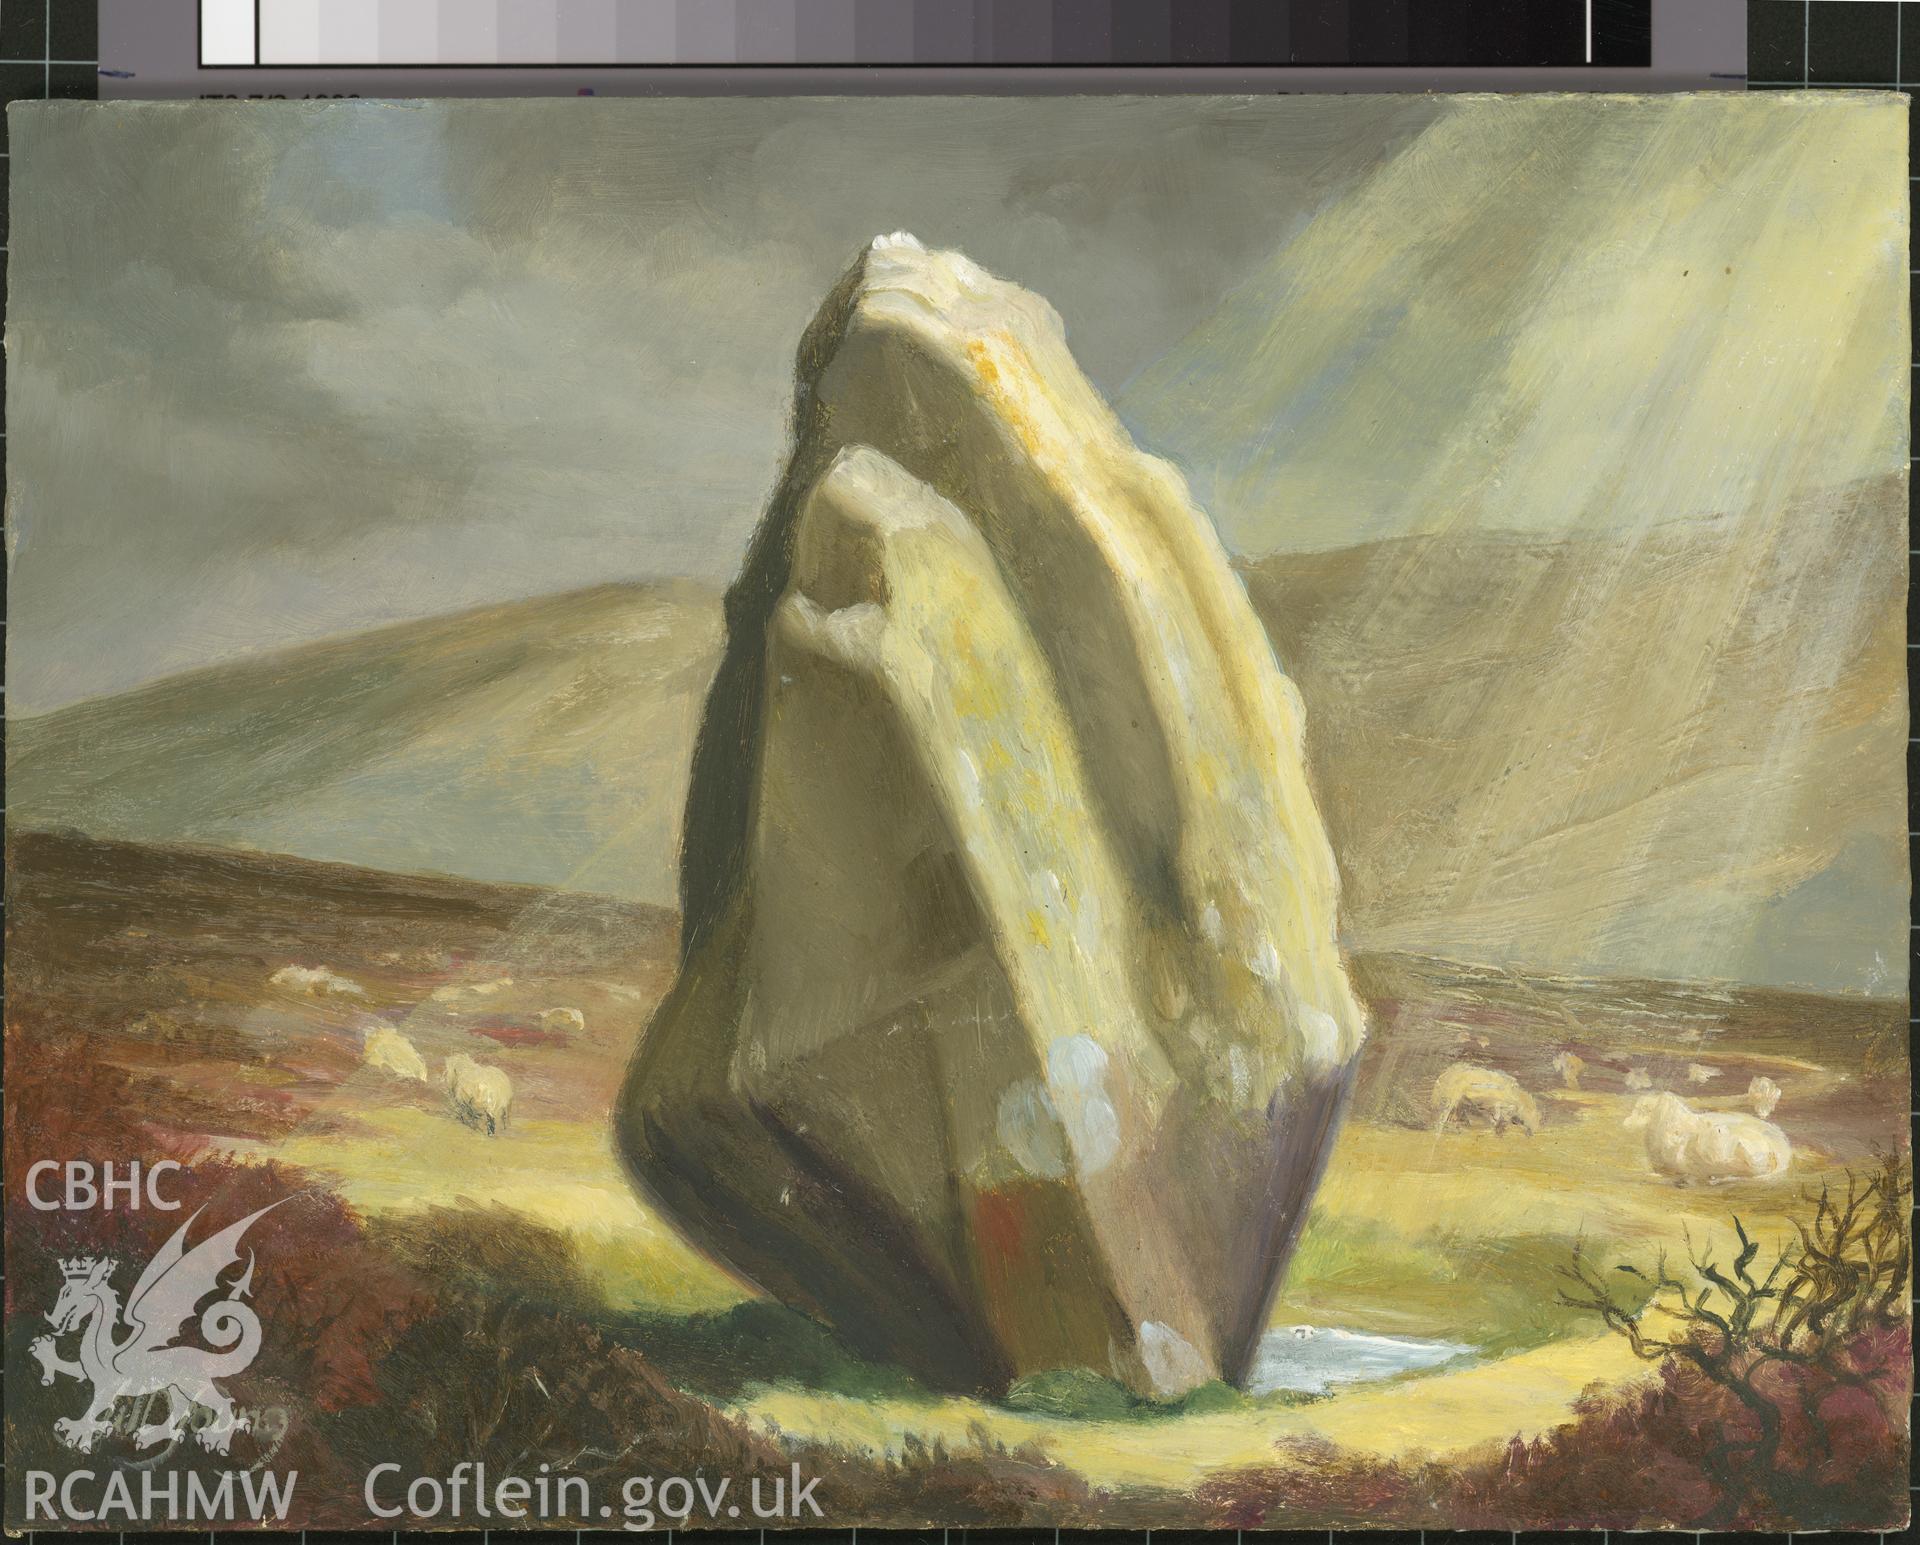 Digital copy of 5" x 8" oil painting of Waun Mawn Common Stone, Nevern, from an original painted by Mrs J.C. Young.